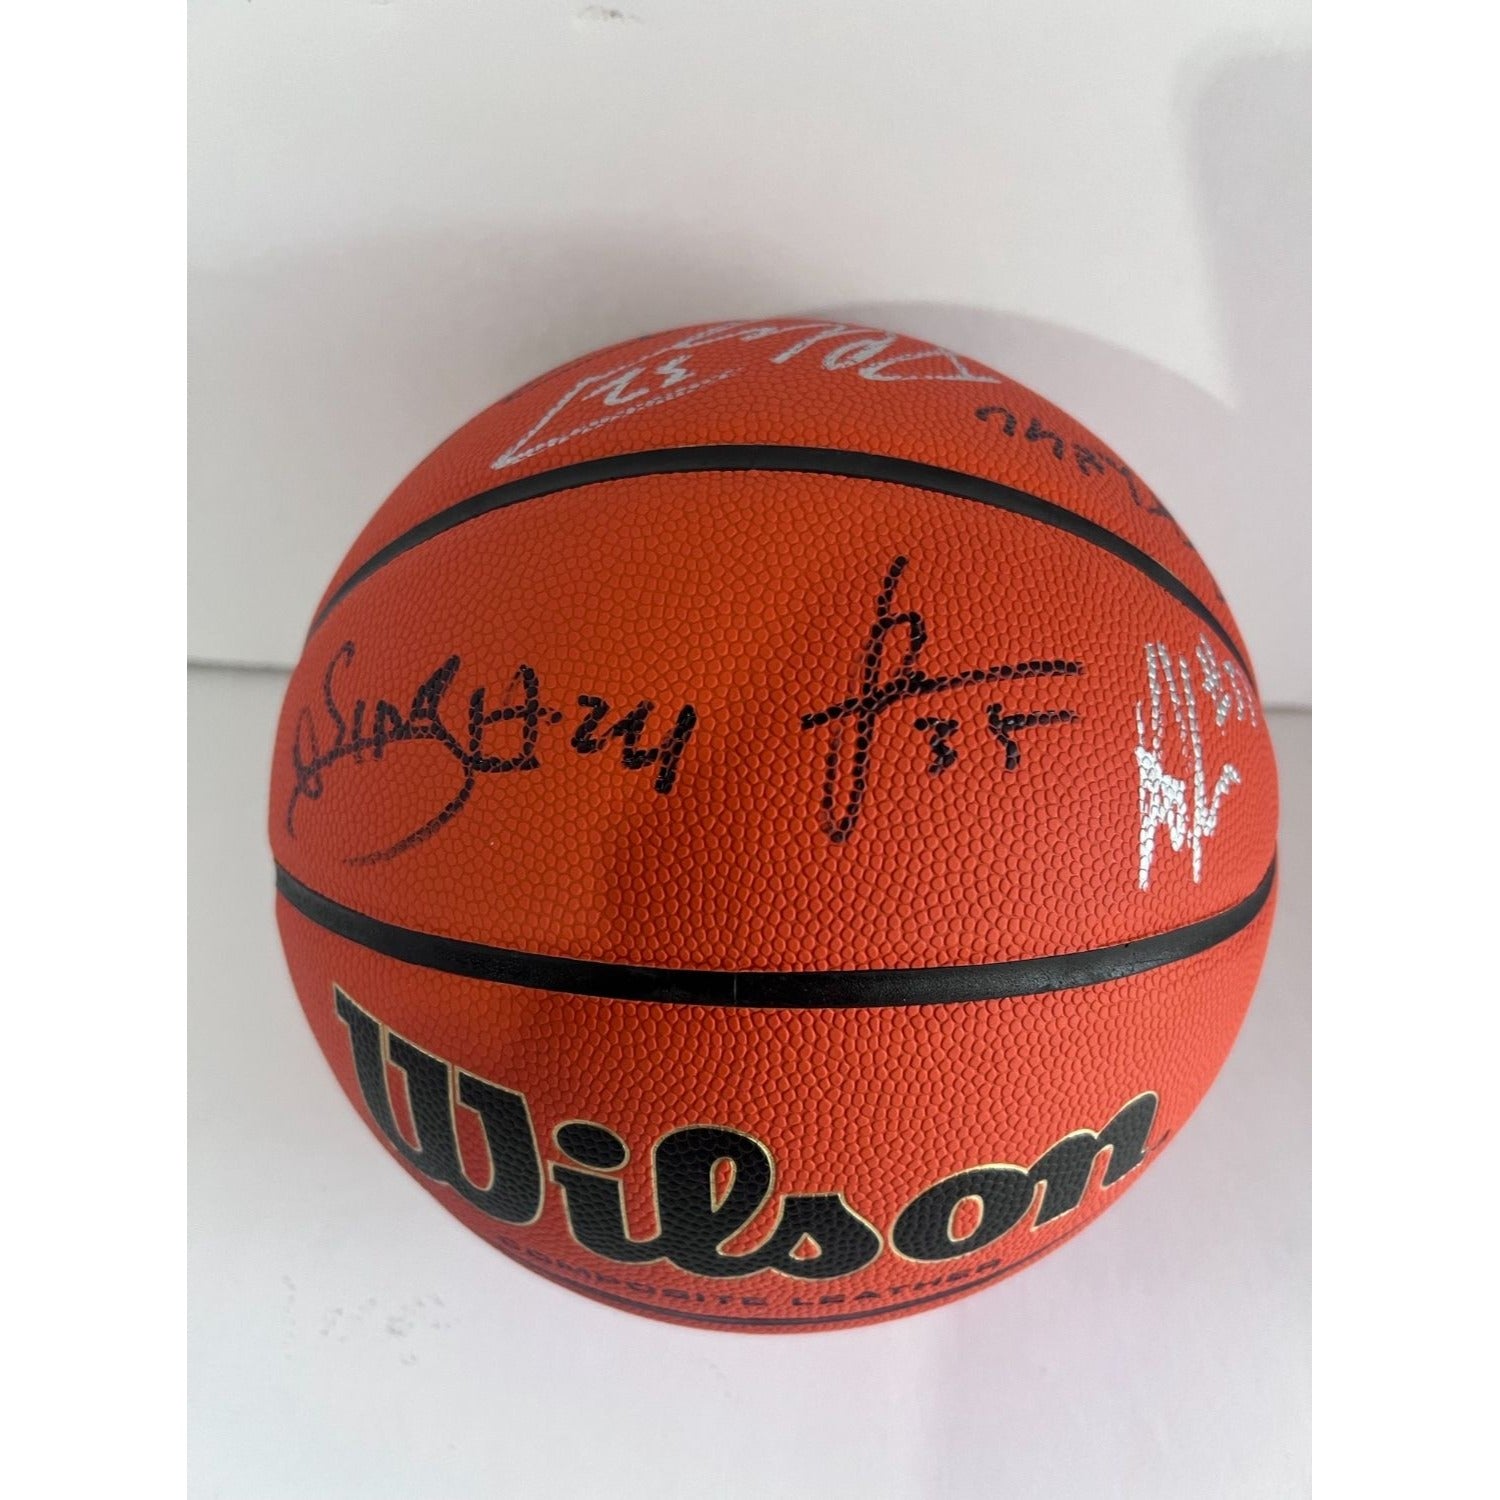 University of Connecticut men's NCAA basketball national champions team signed Wilson full size basketball